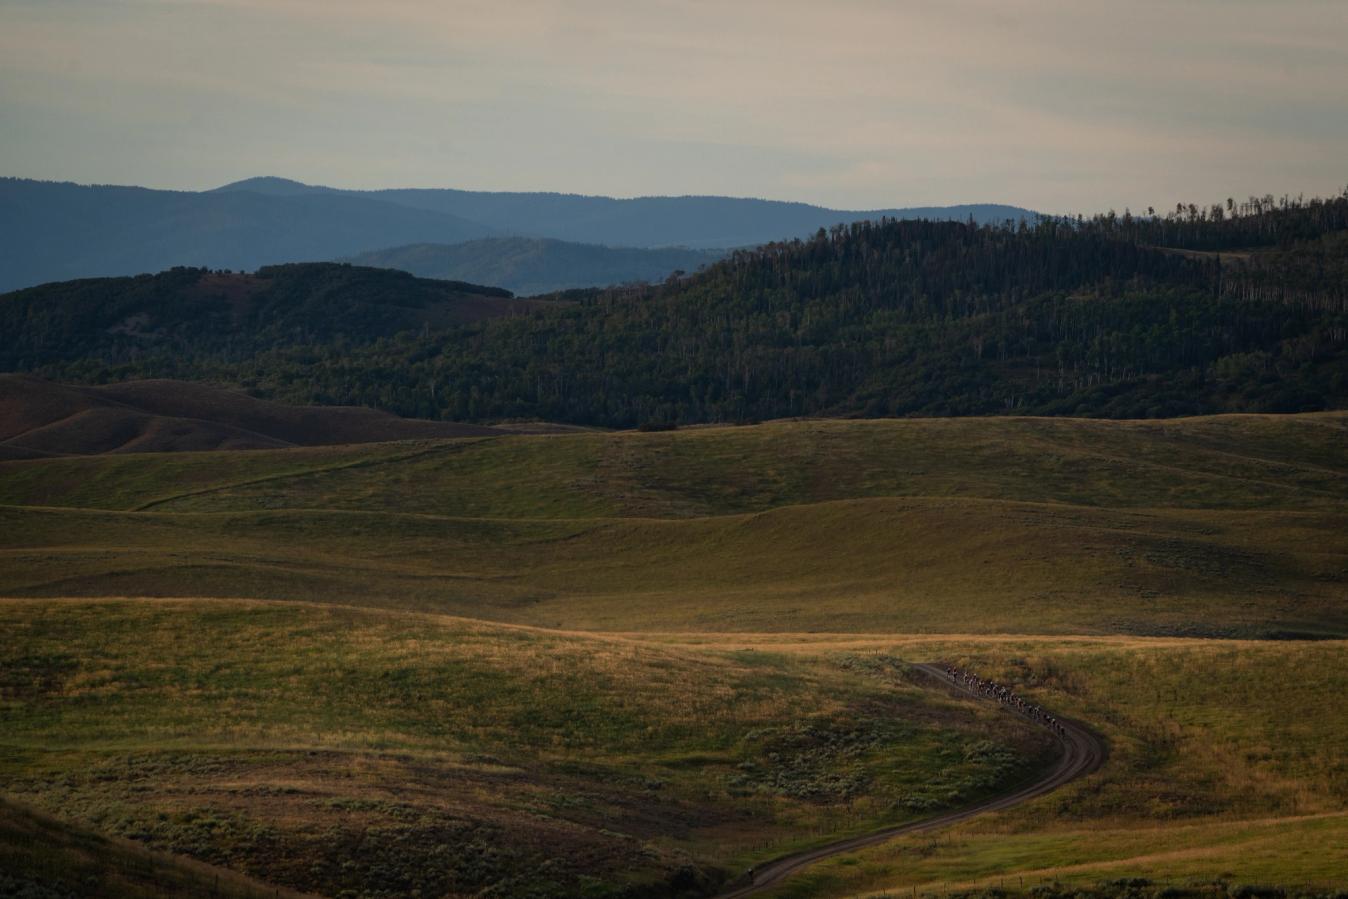 The wide range around Steamboat Springs, Colorado is the perfect canvas for a bike race